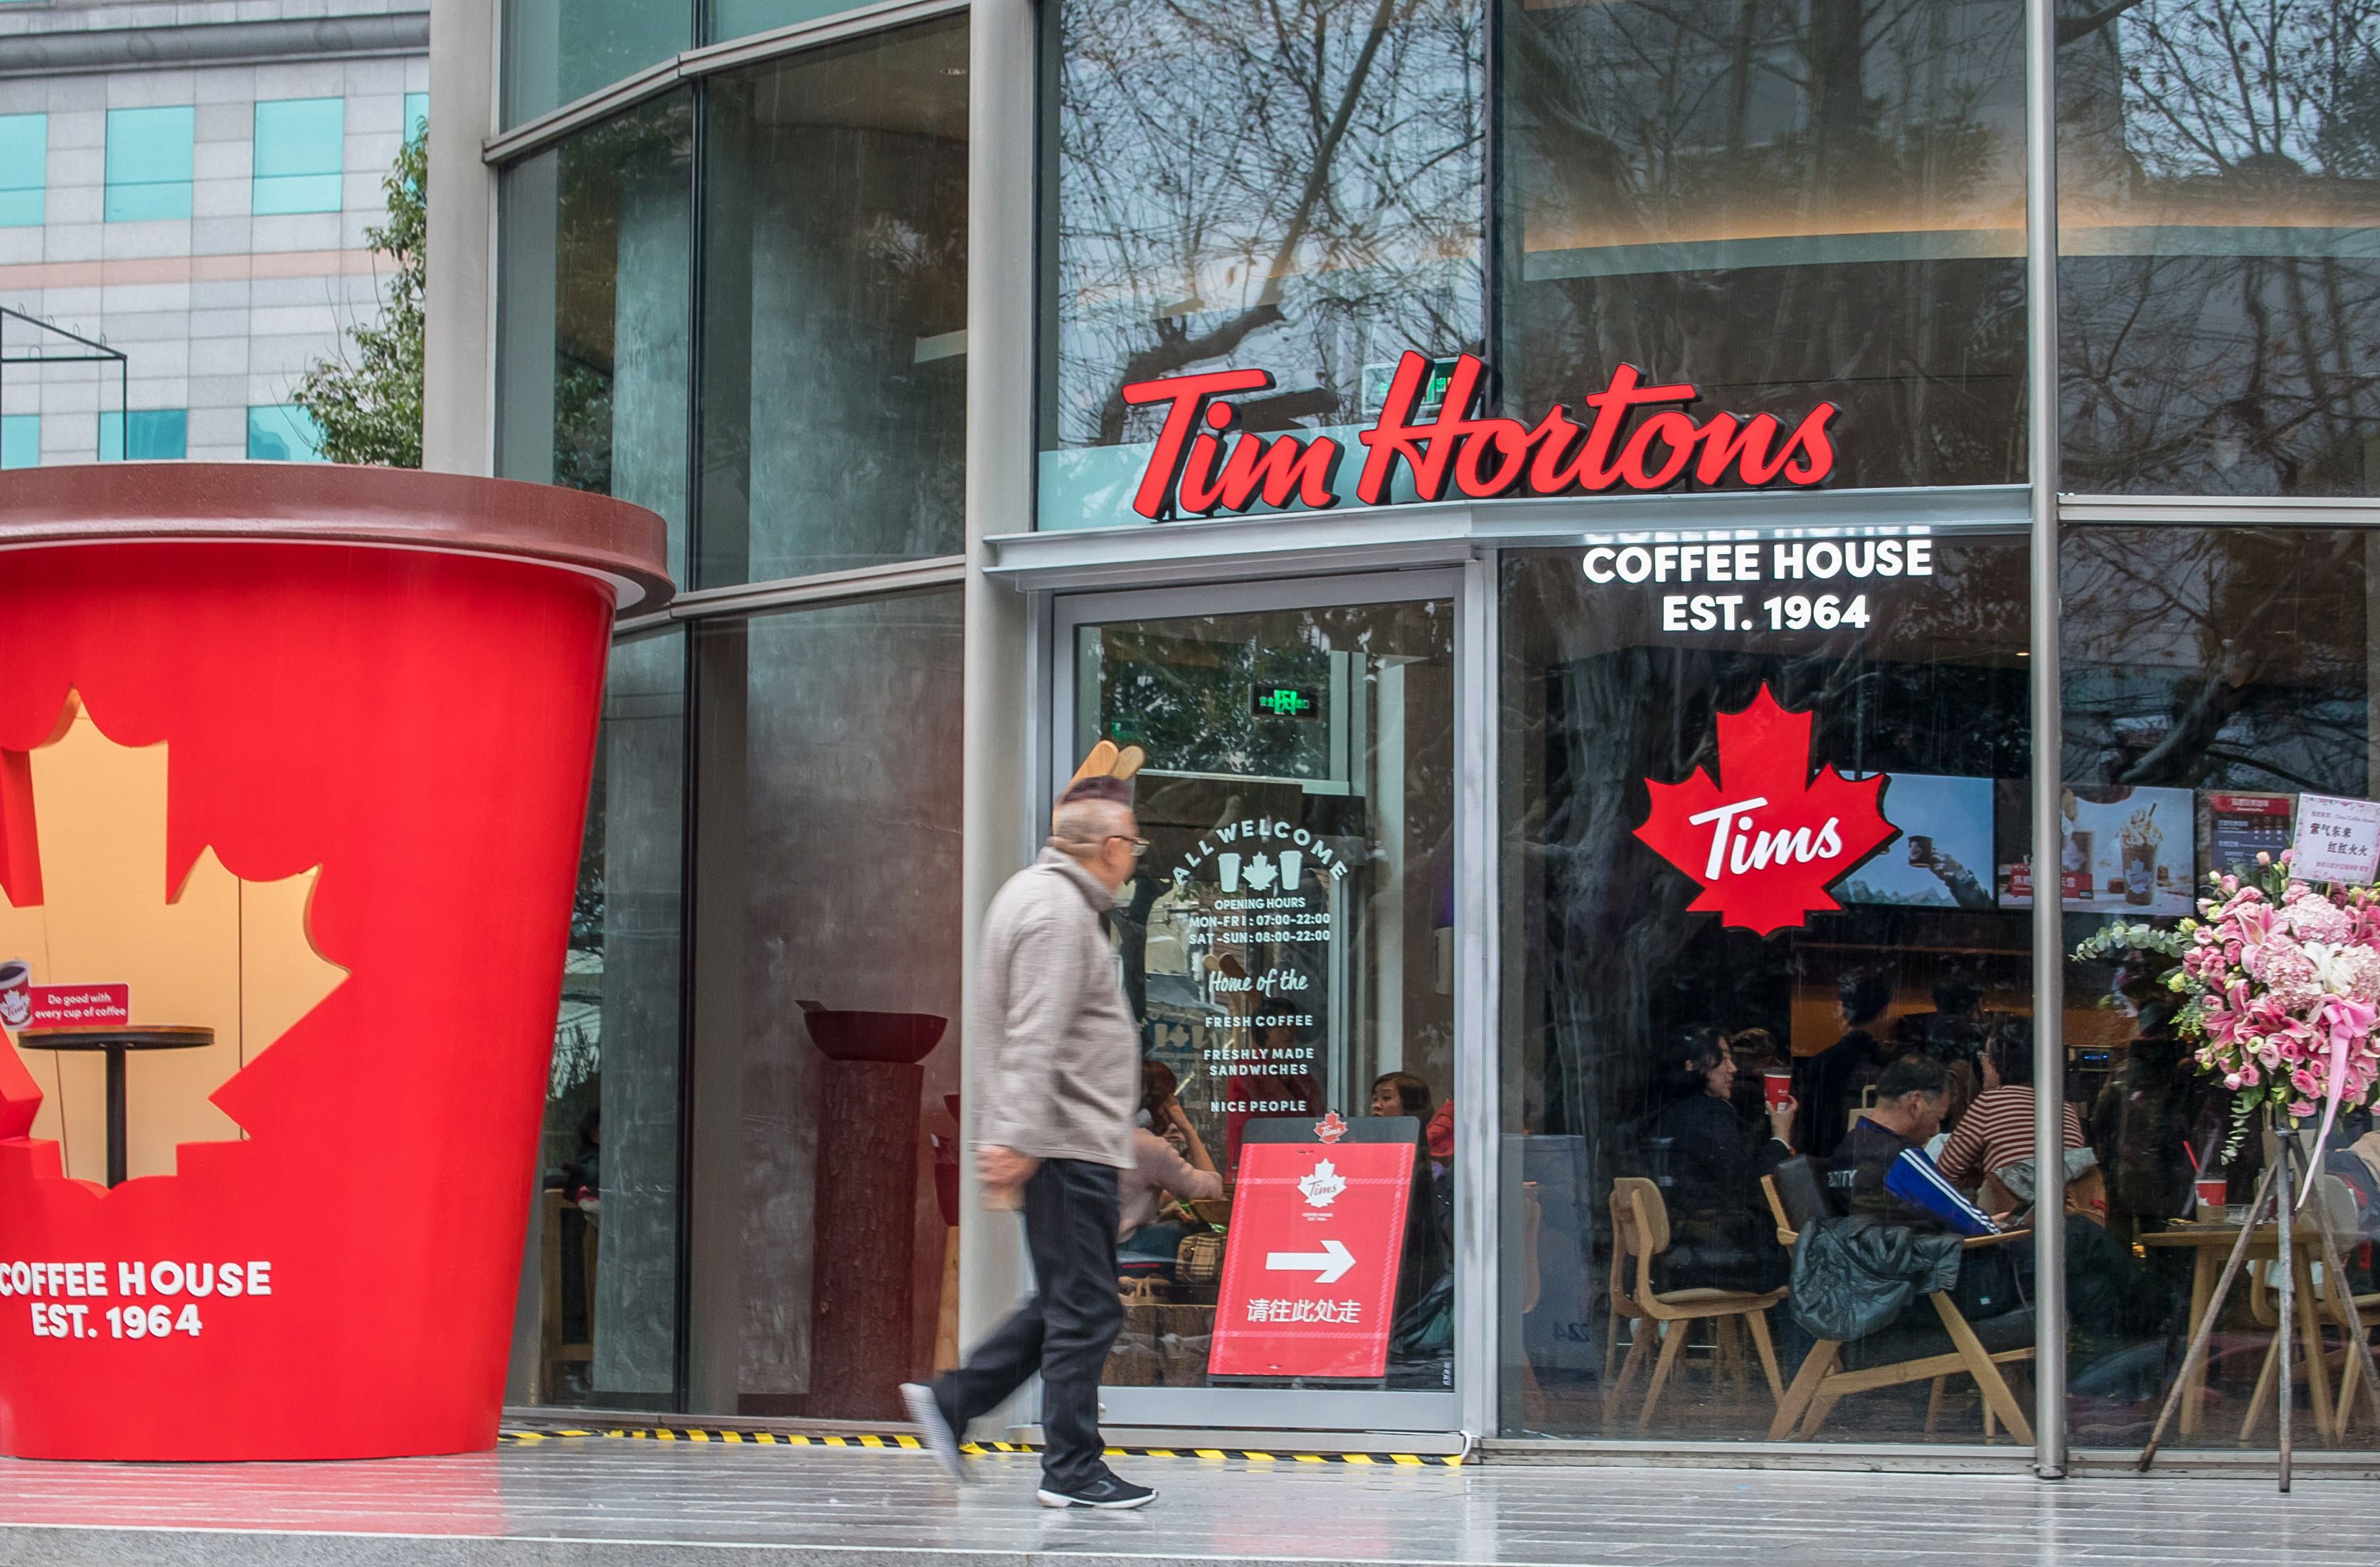 Tim Hortons China Brews Up Explosive Growth Plan Using Tech And